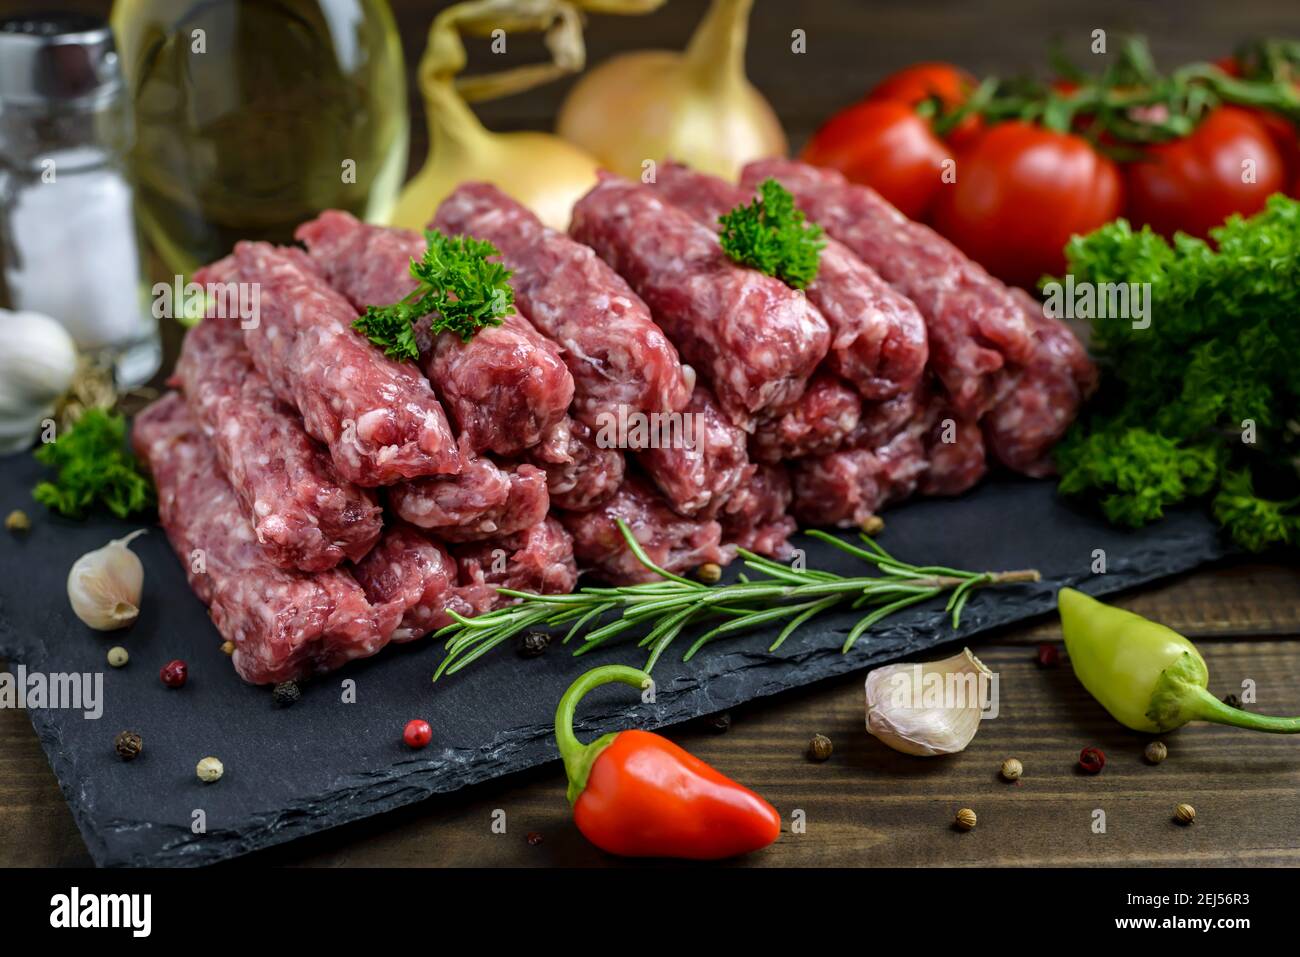 Raw minced meat cevapi ready for barbeque with various fresh vegetables on a wooden table. Selective focus. Stock Photo